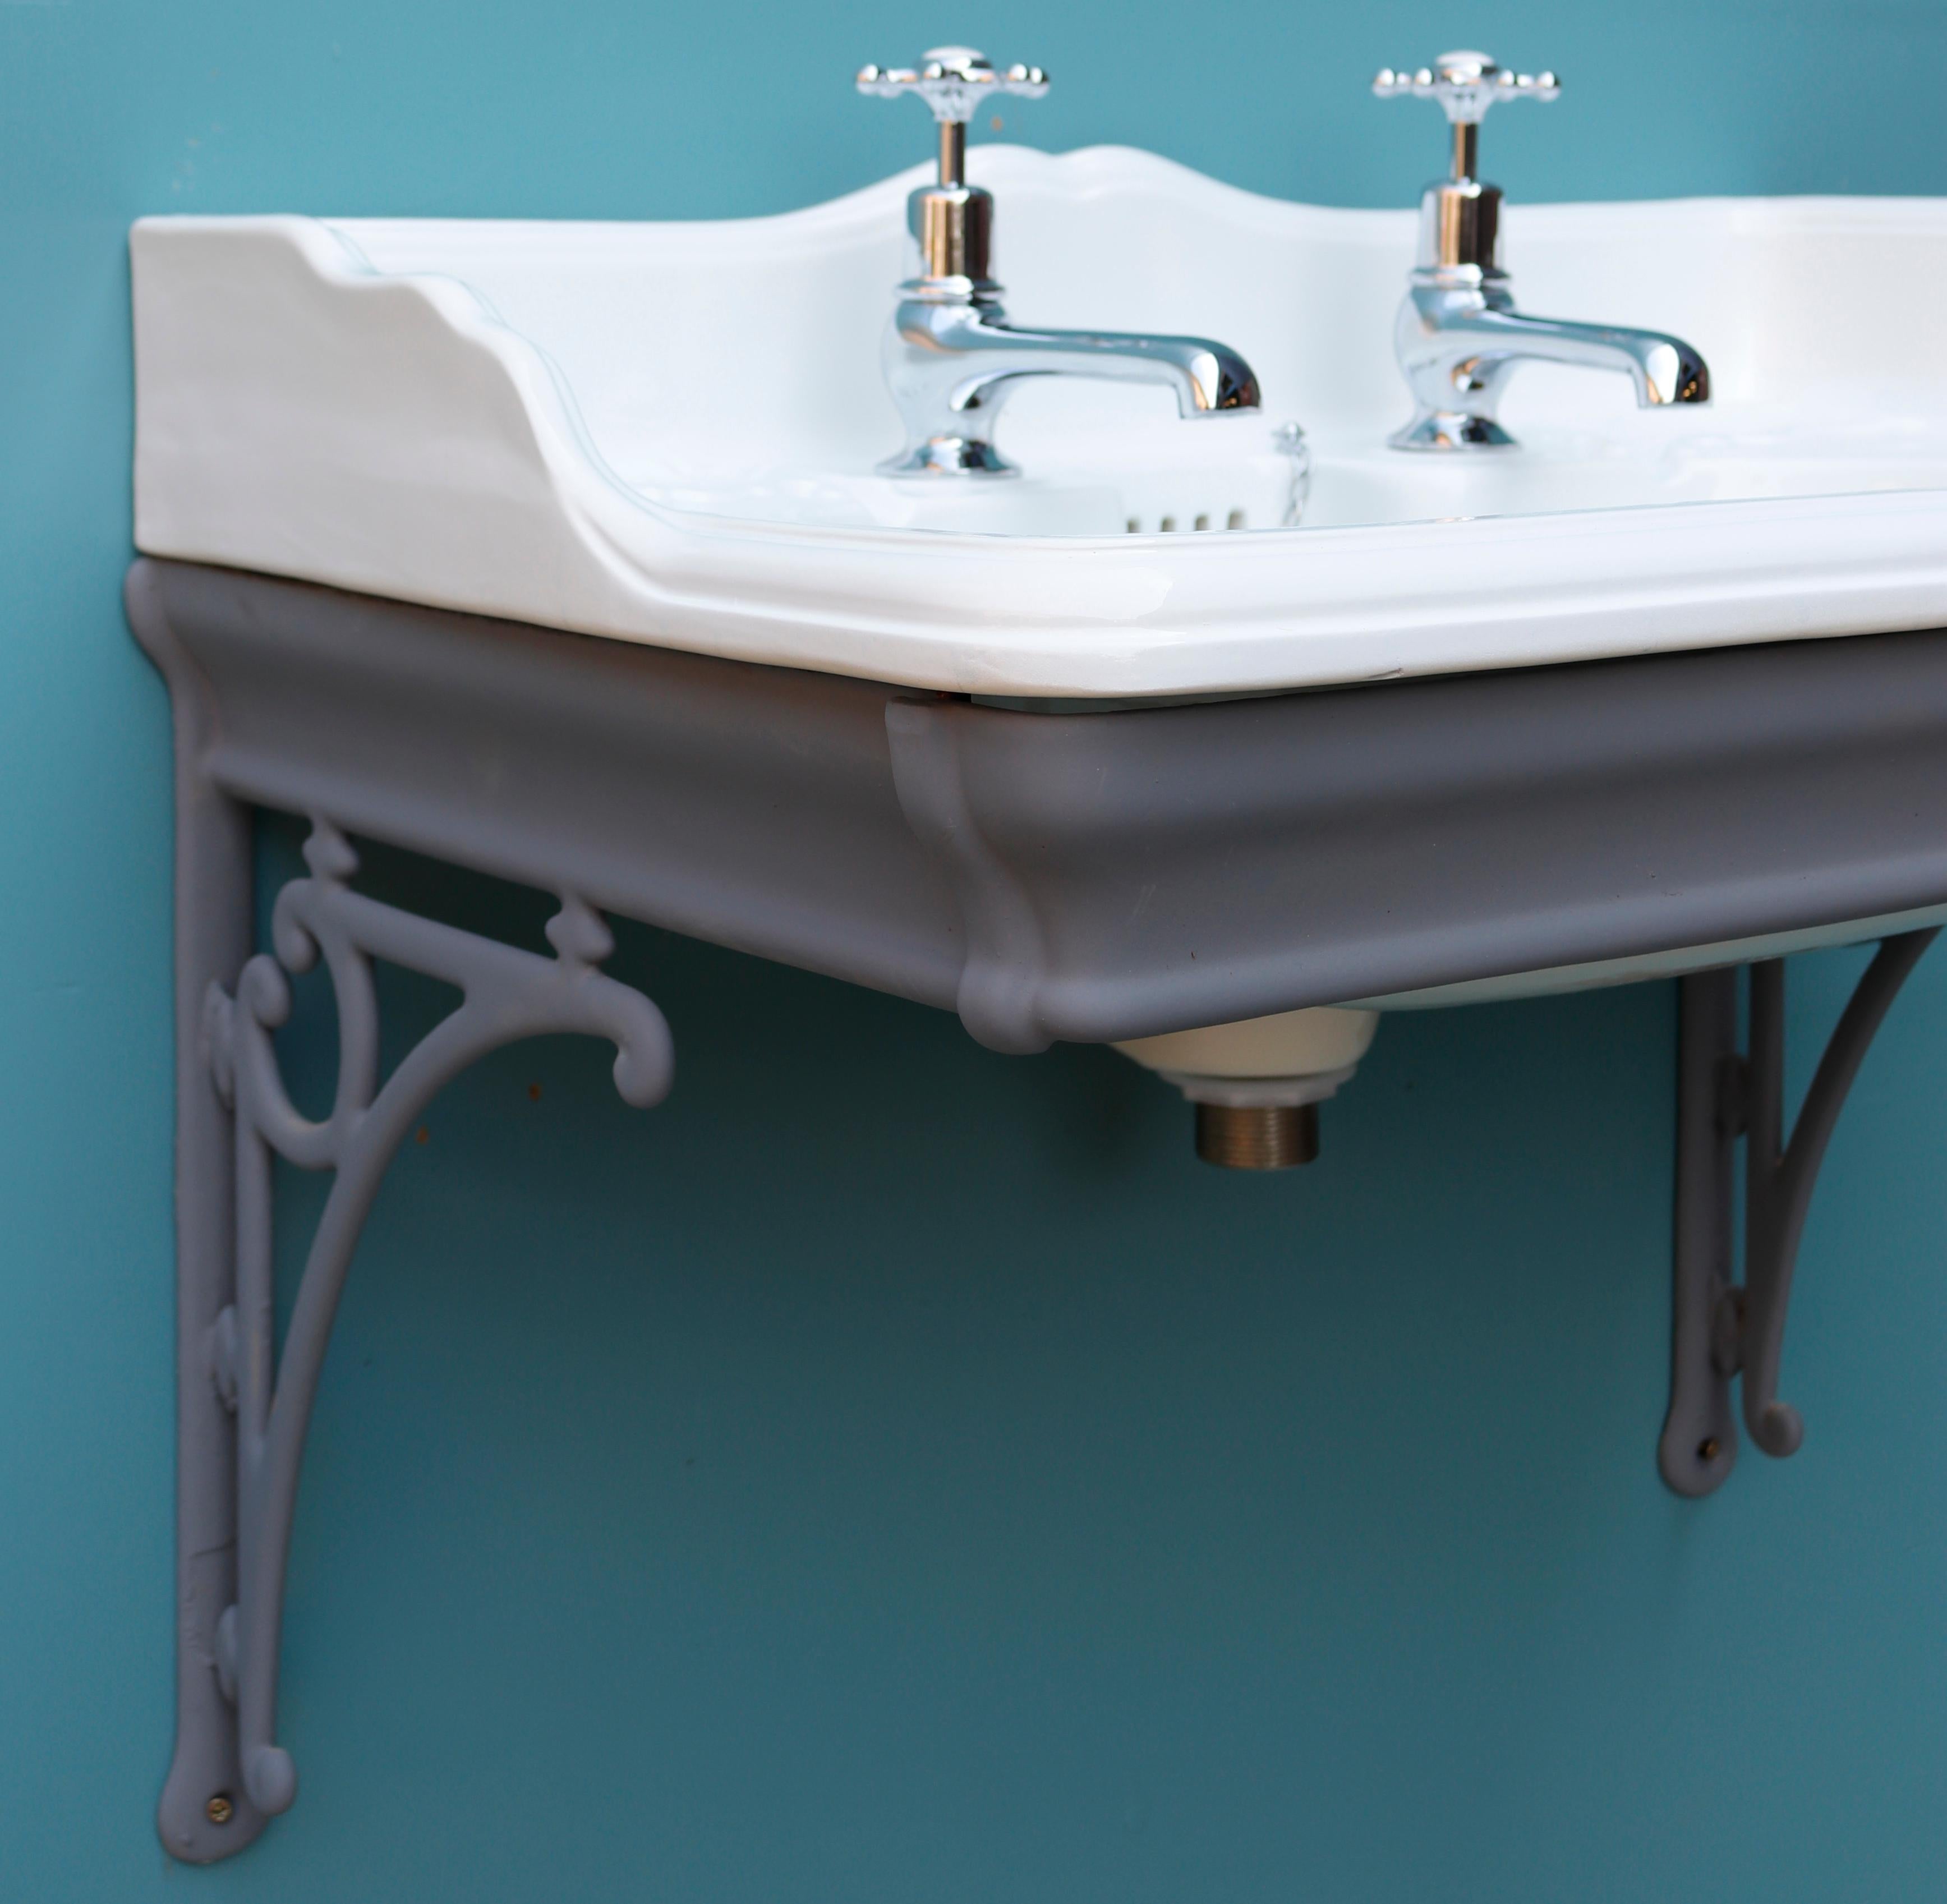 Reclaimed Victorian Sink Basin dating to around 1900. Complete with a cast iron bracket painted in grey primer. Please note the taps are not included.